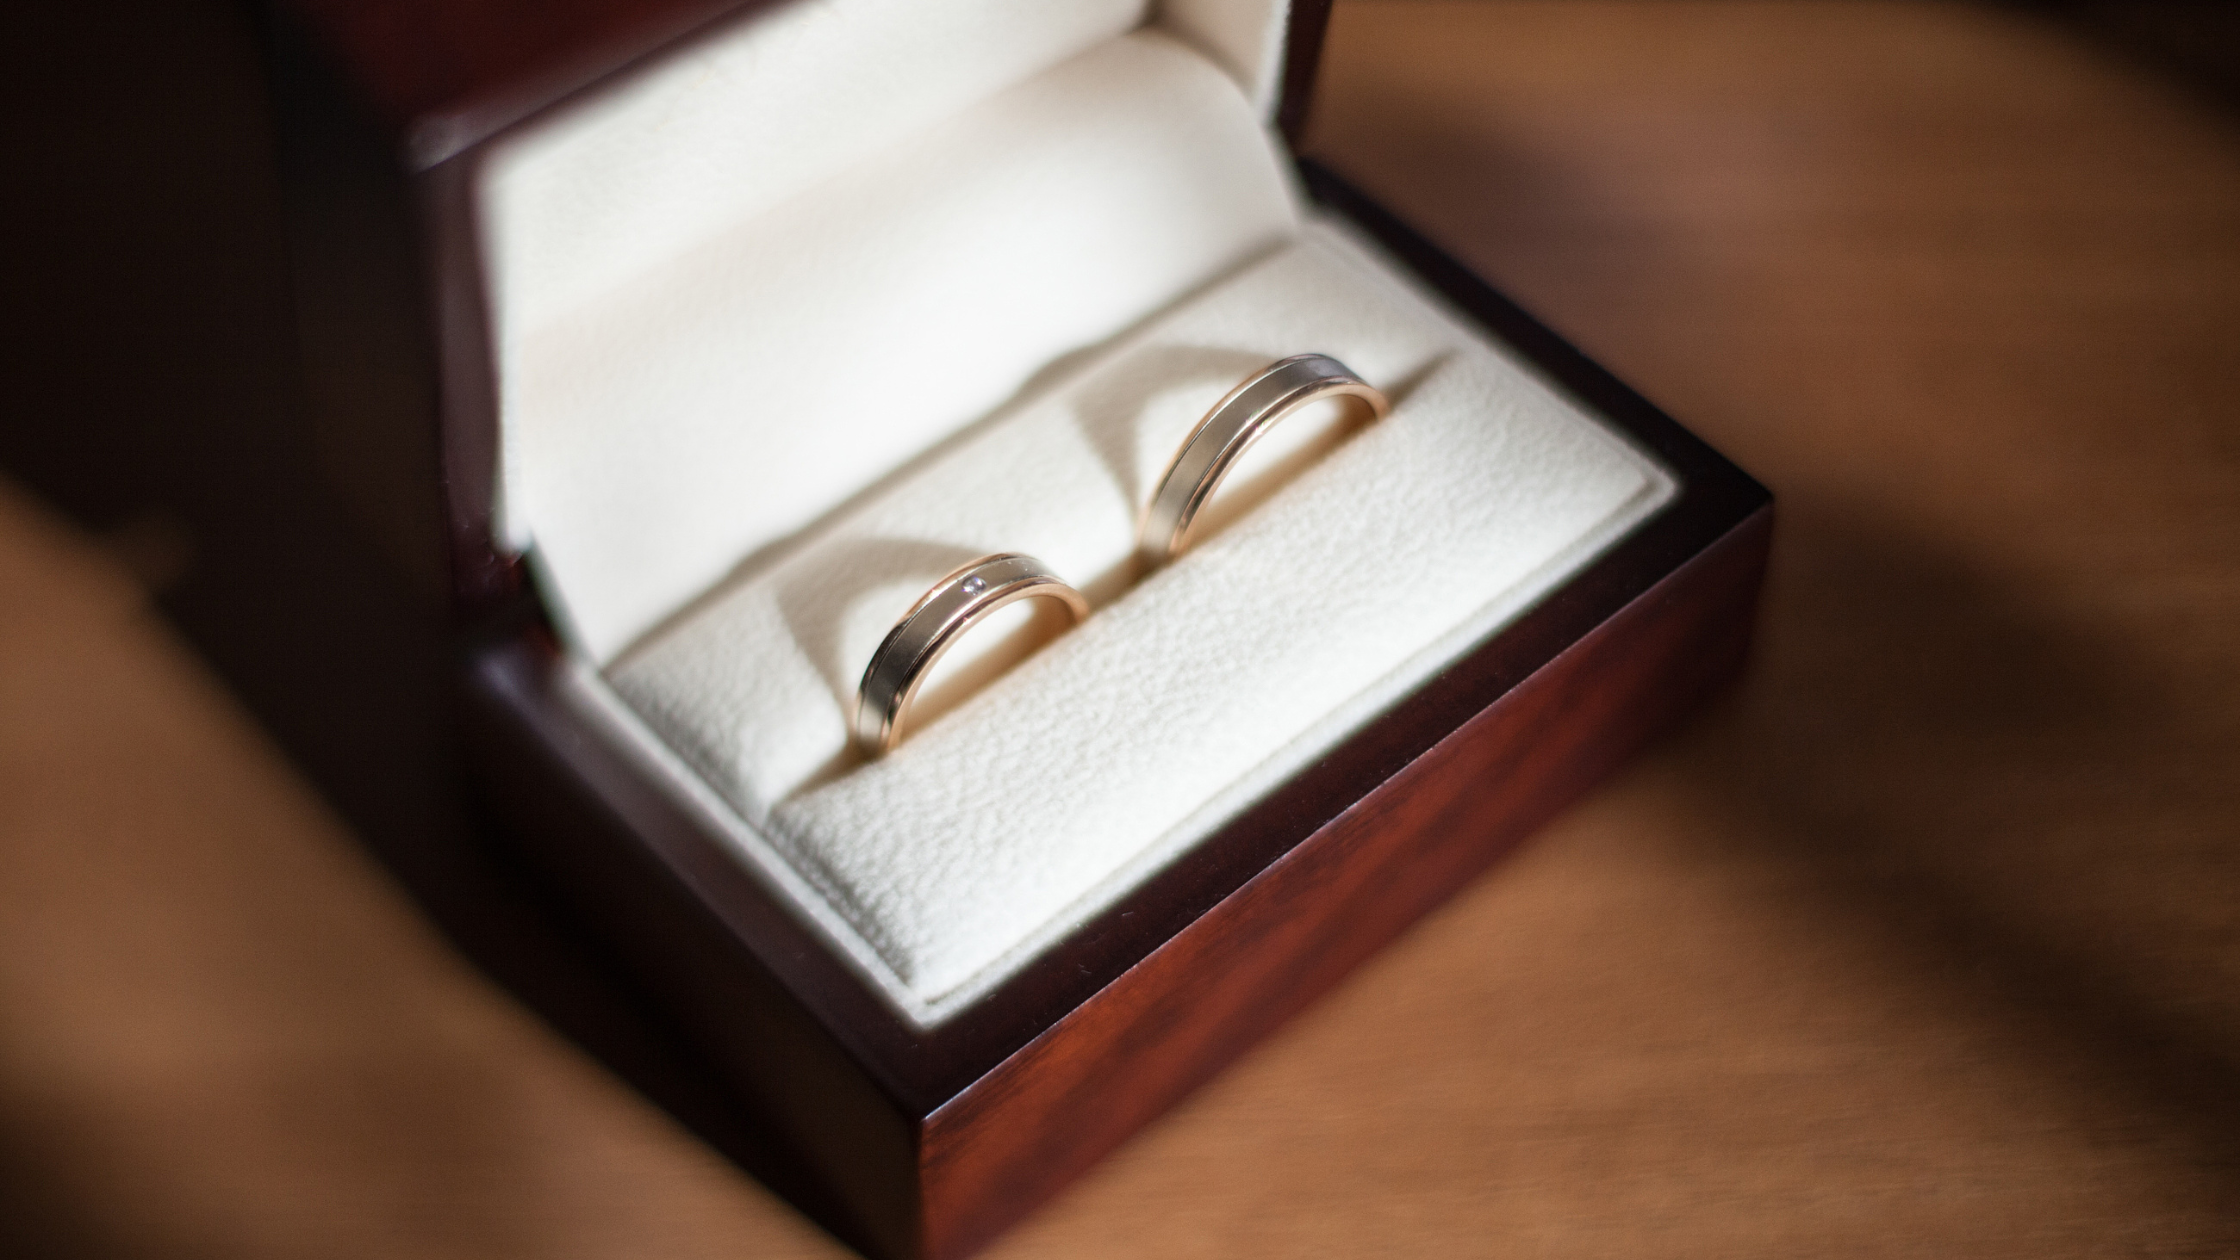 How Much Is The Average Wedding Ring?